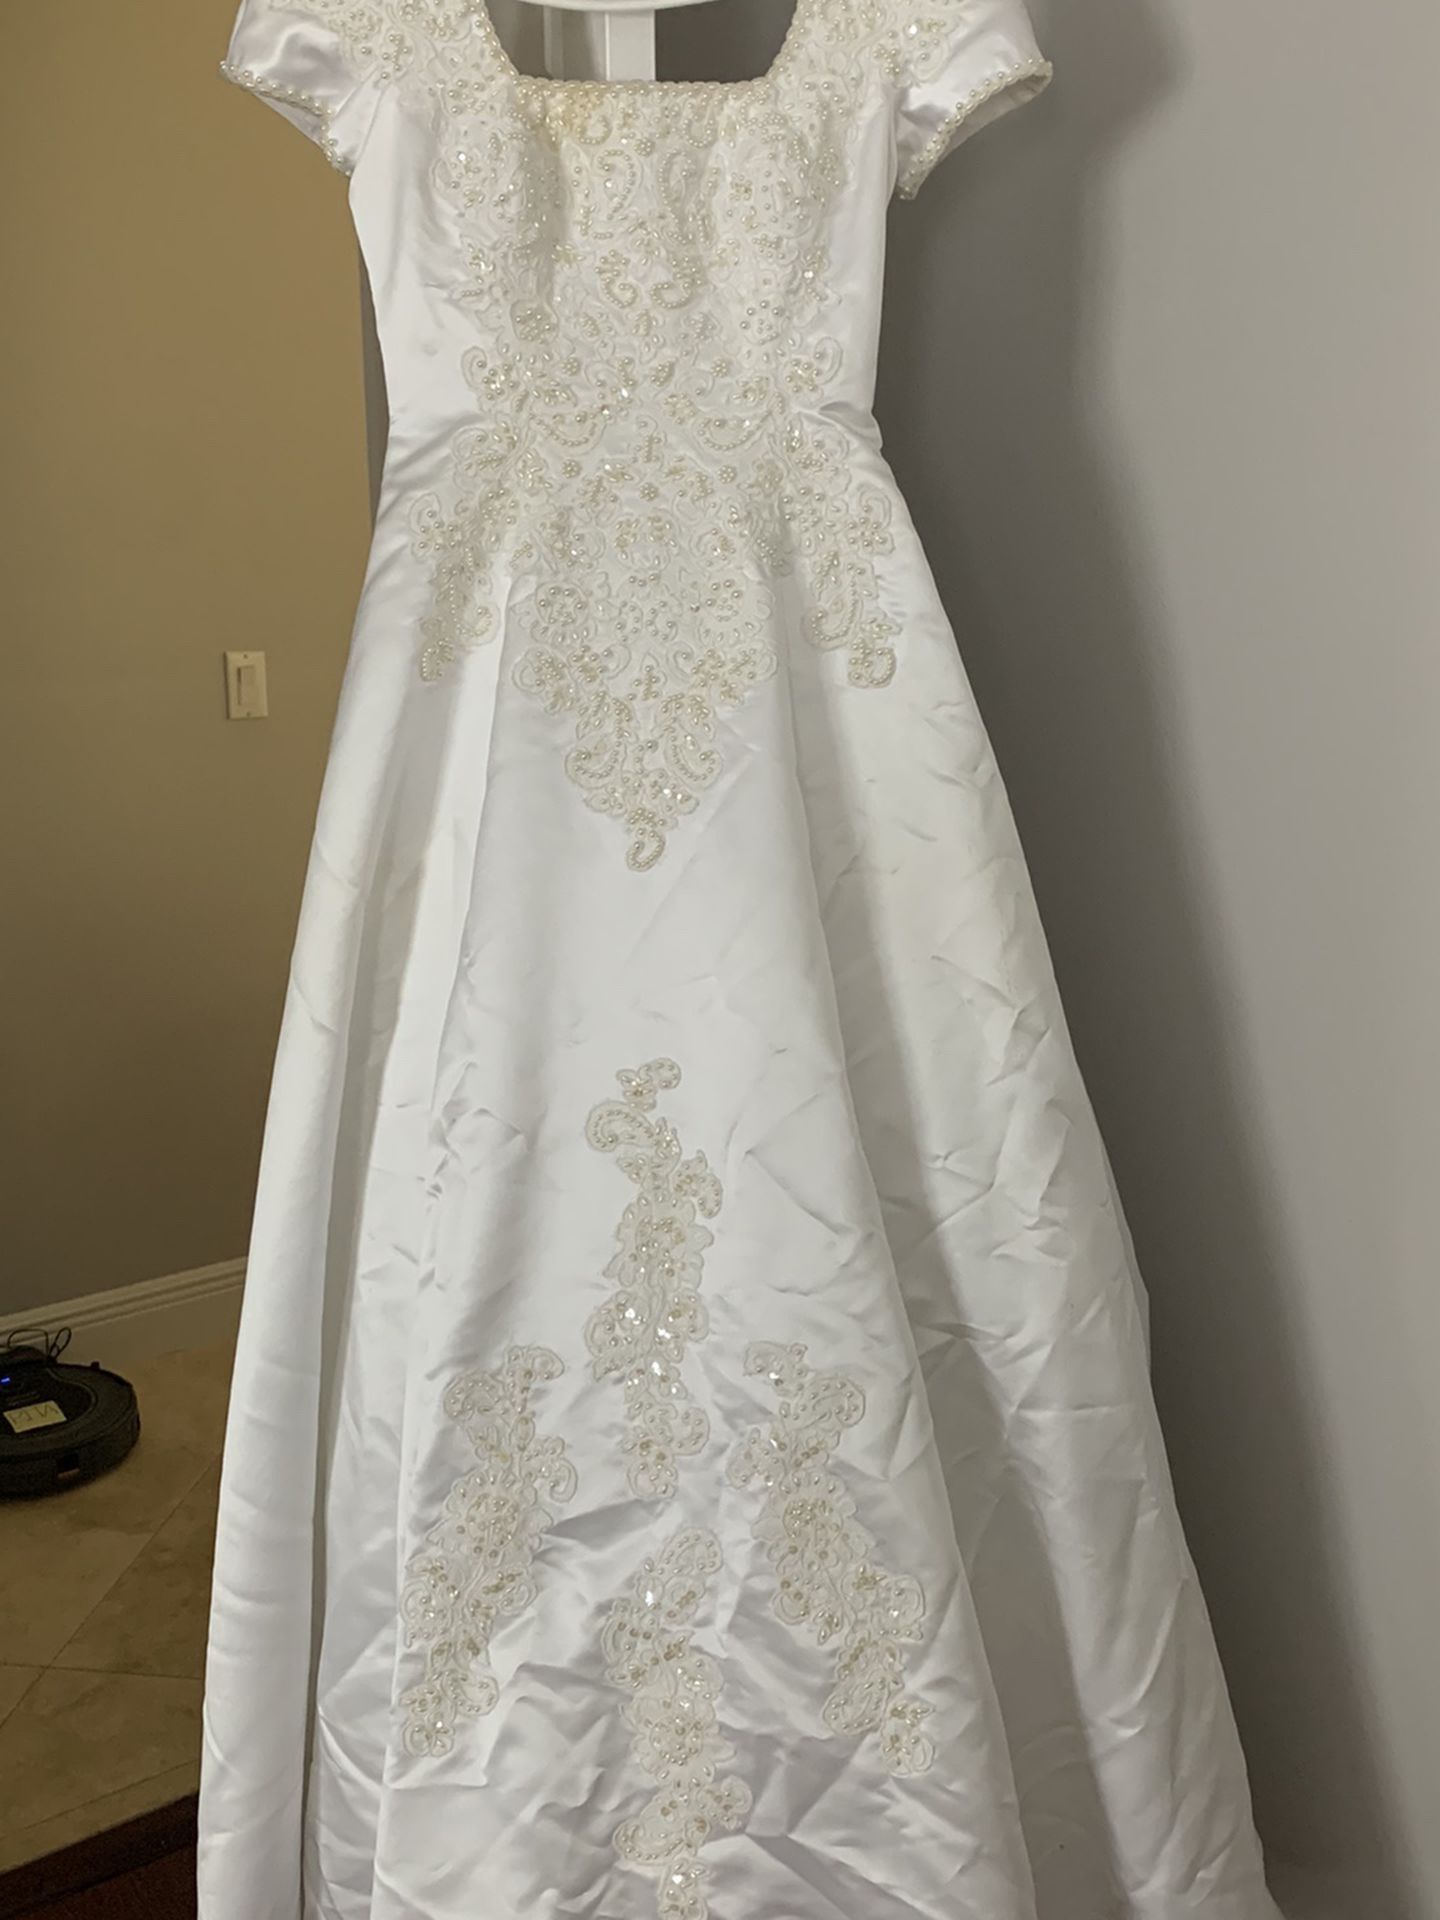 Wedding Dress - Size 4 - One Section Of The Sequins Changed Colors, See Picture